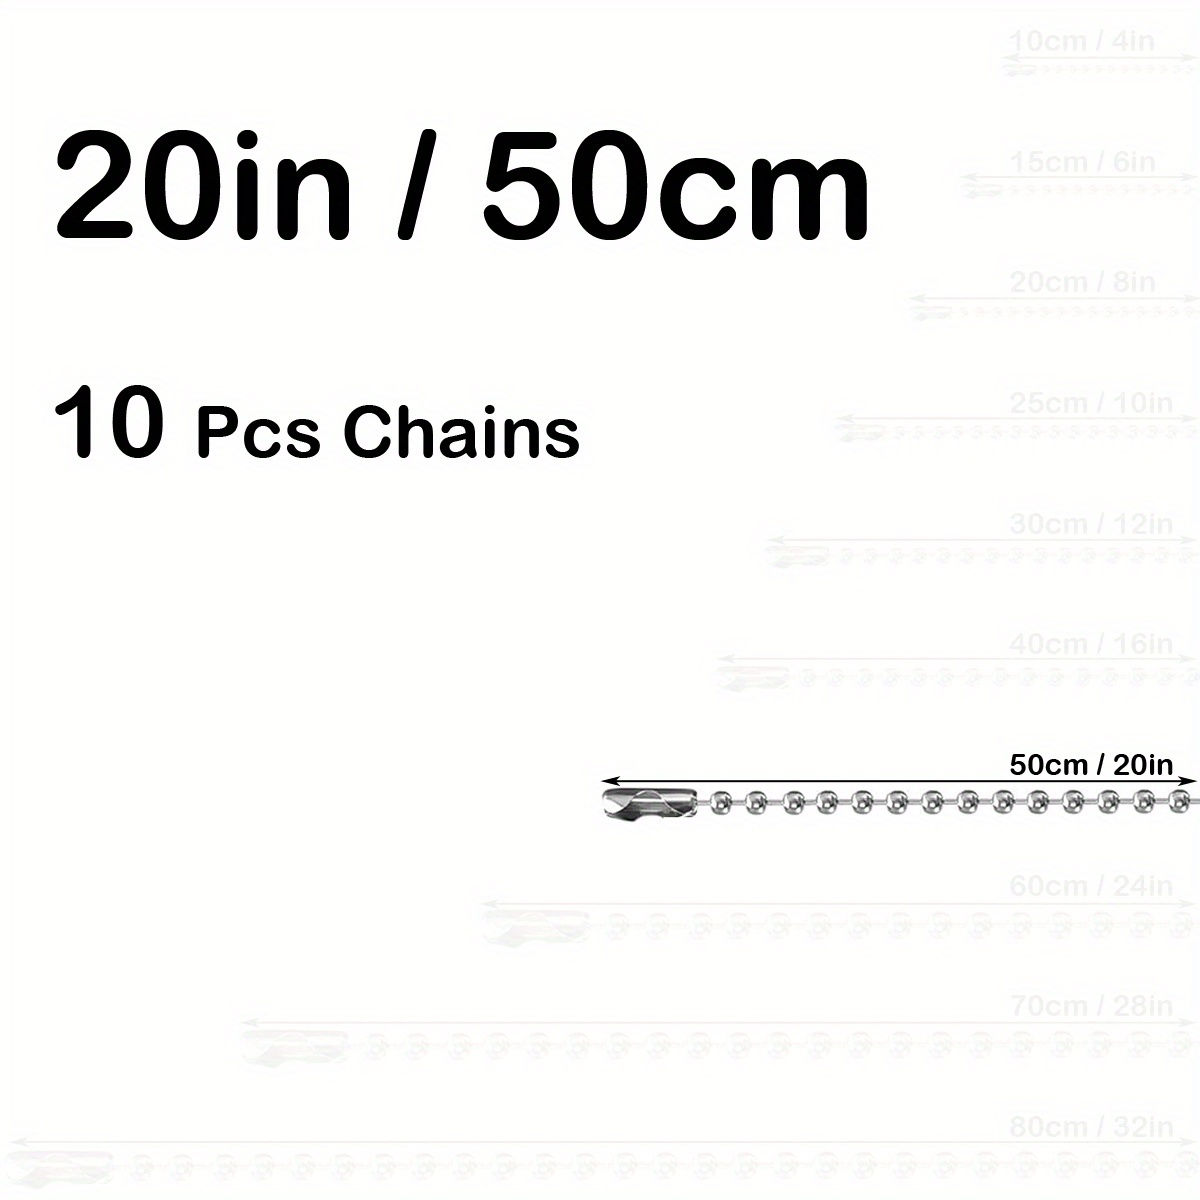 Pack of 50 Ball Bead Chain, Dog Tag Chain Necklace Bulk 24 inches Silver  Nickel Plated Ball Chain for Jewelry Making DIY Crafts 2.4mm Bead  Adjustable